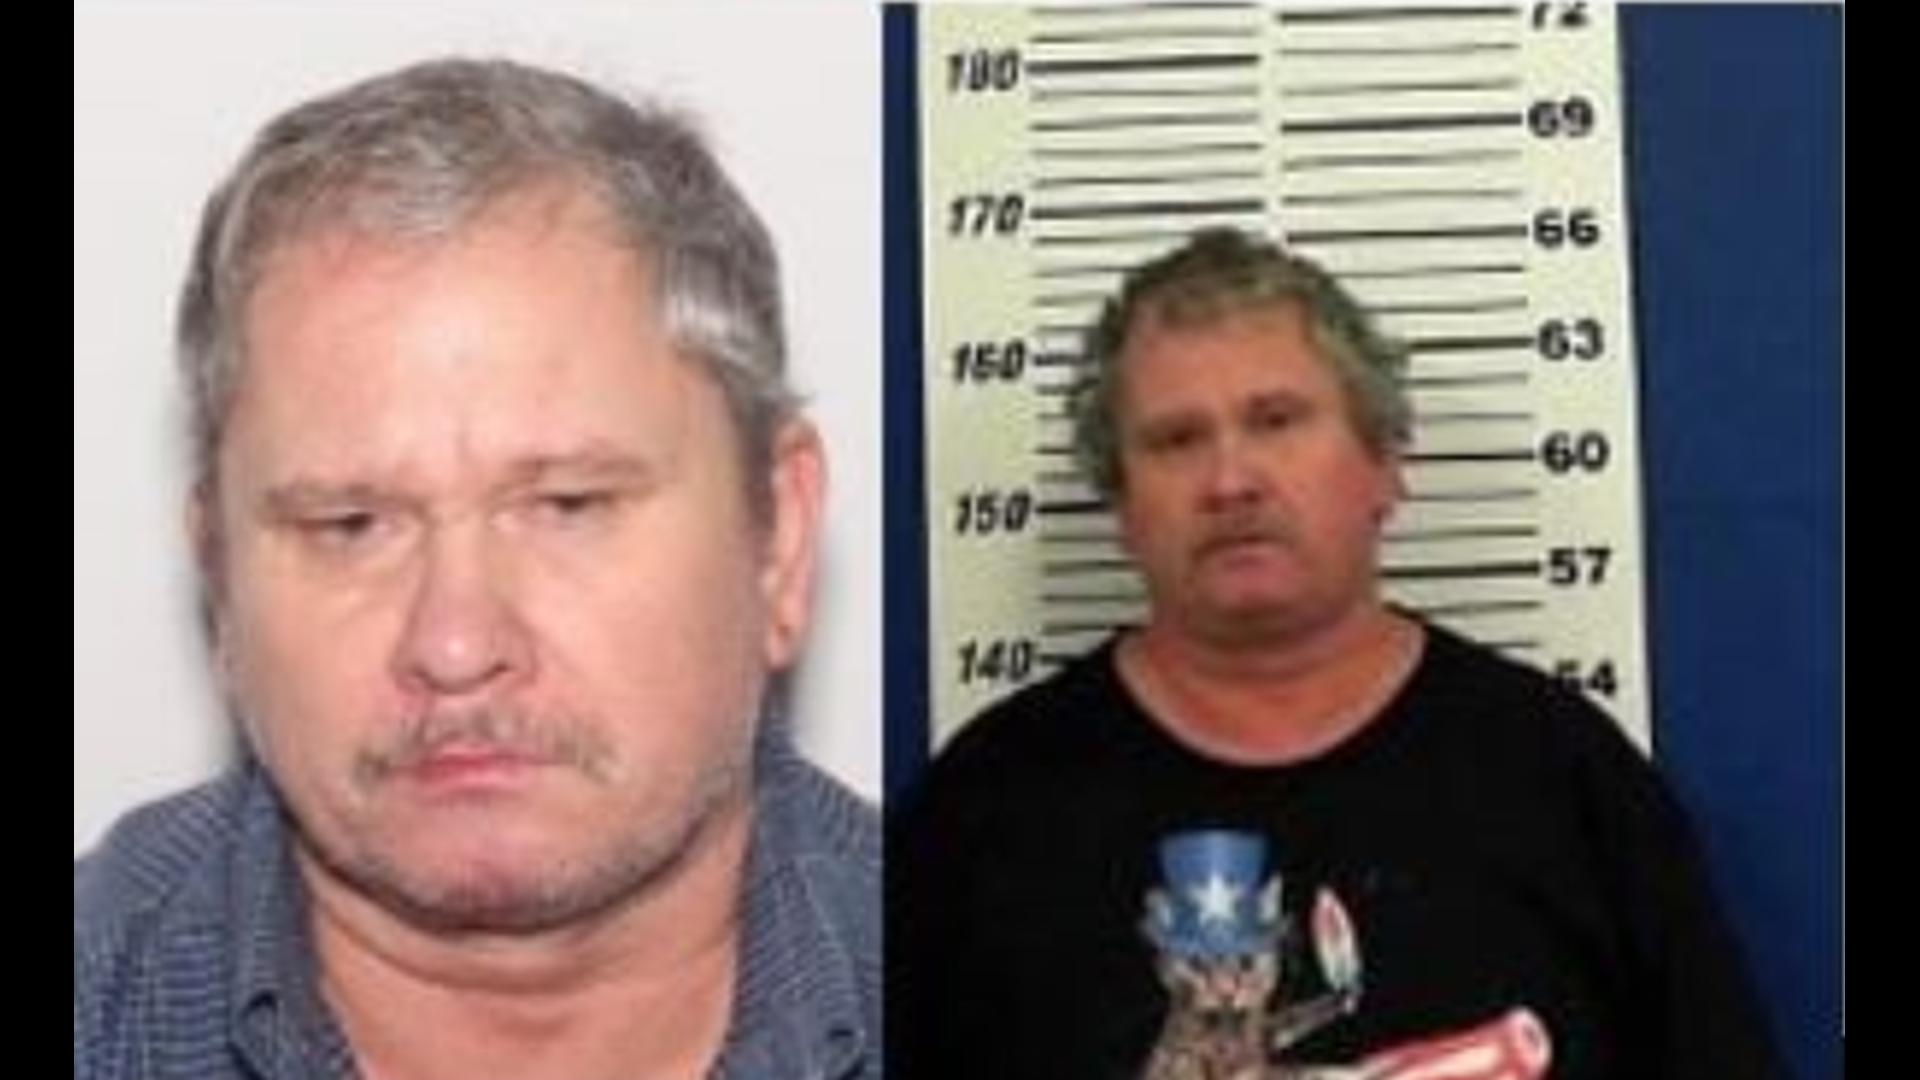 Cecil Daren Ferrell has been sentenced by a federal judge to 10 years in prison for being responsible for a hit-and-run that killed a Fort Smith native, John Mundell